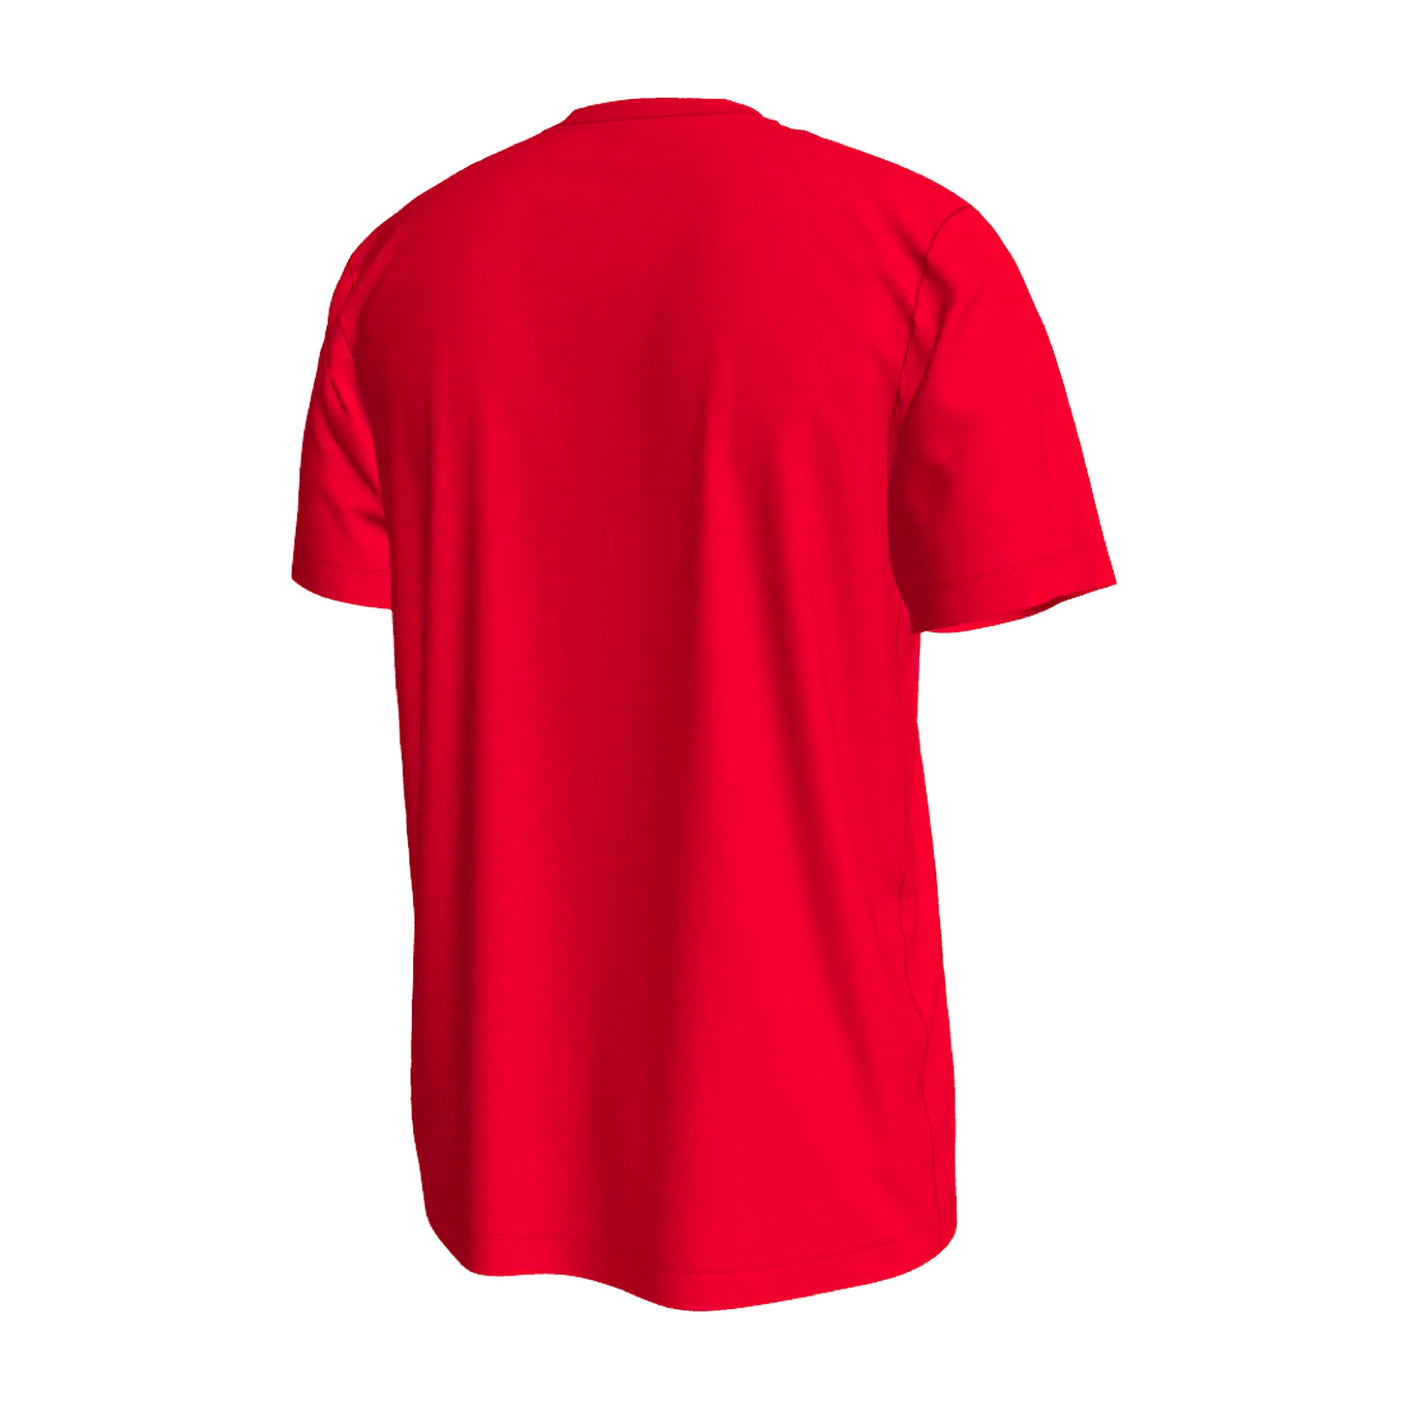 Nike Men's USA Crest T-Shirt Speed Red Back